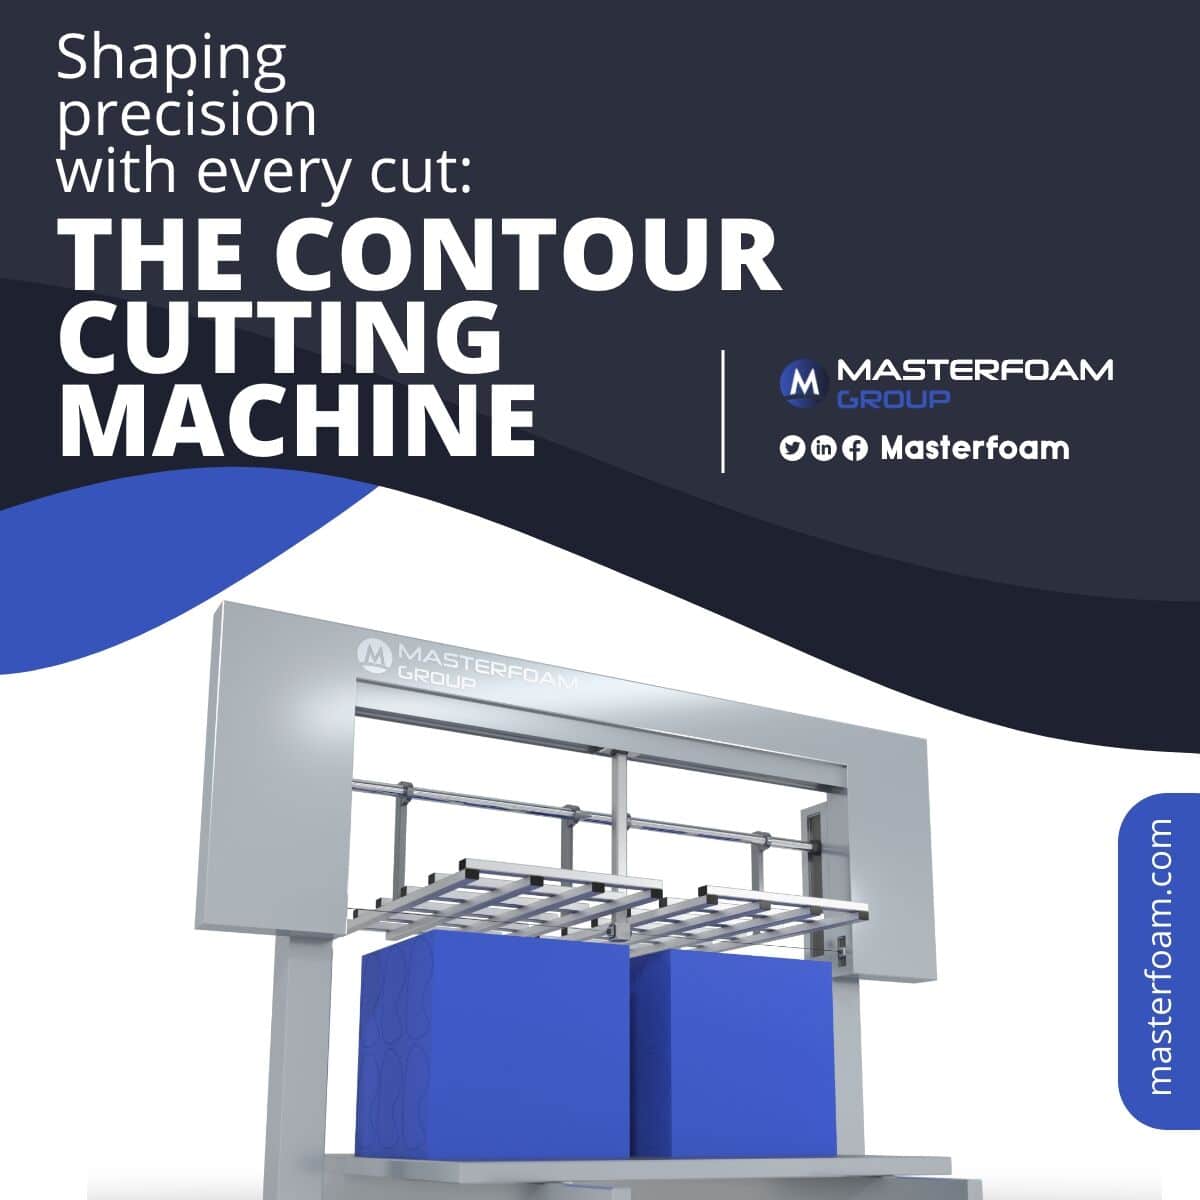 Shaping precision with every cut: The Contour Cutting Machine